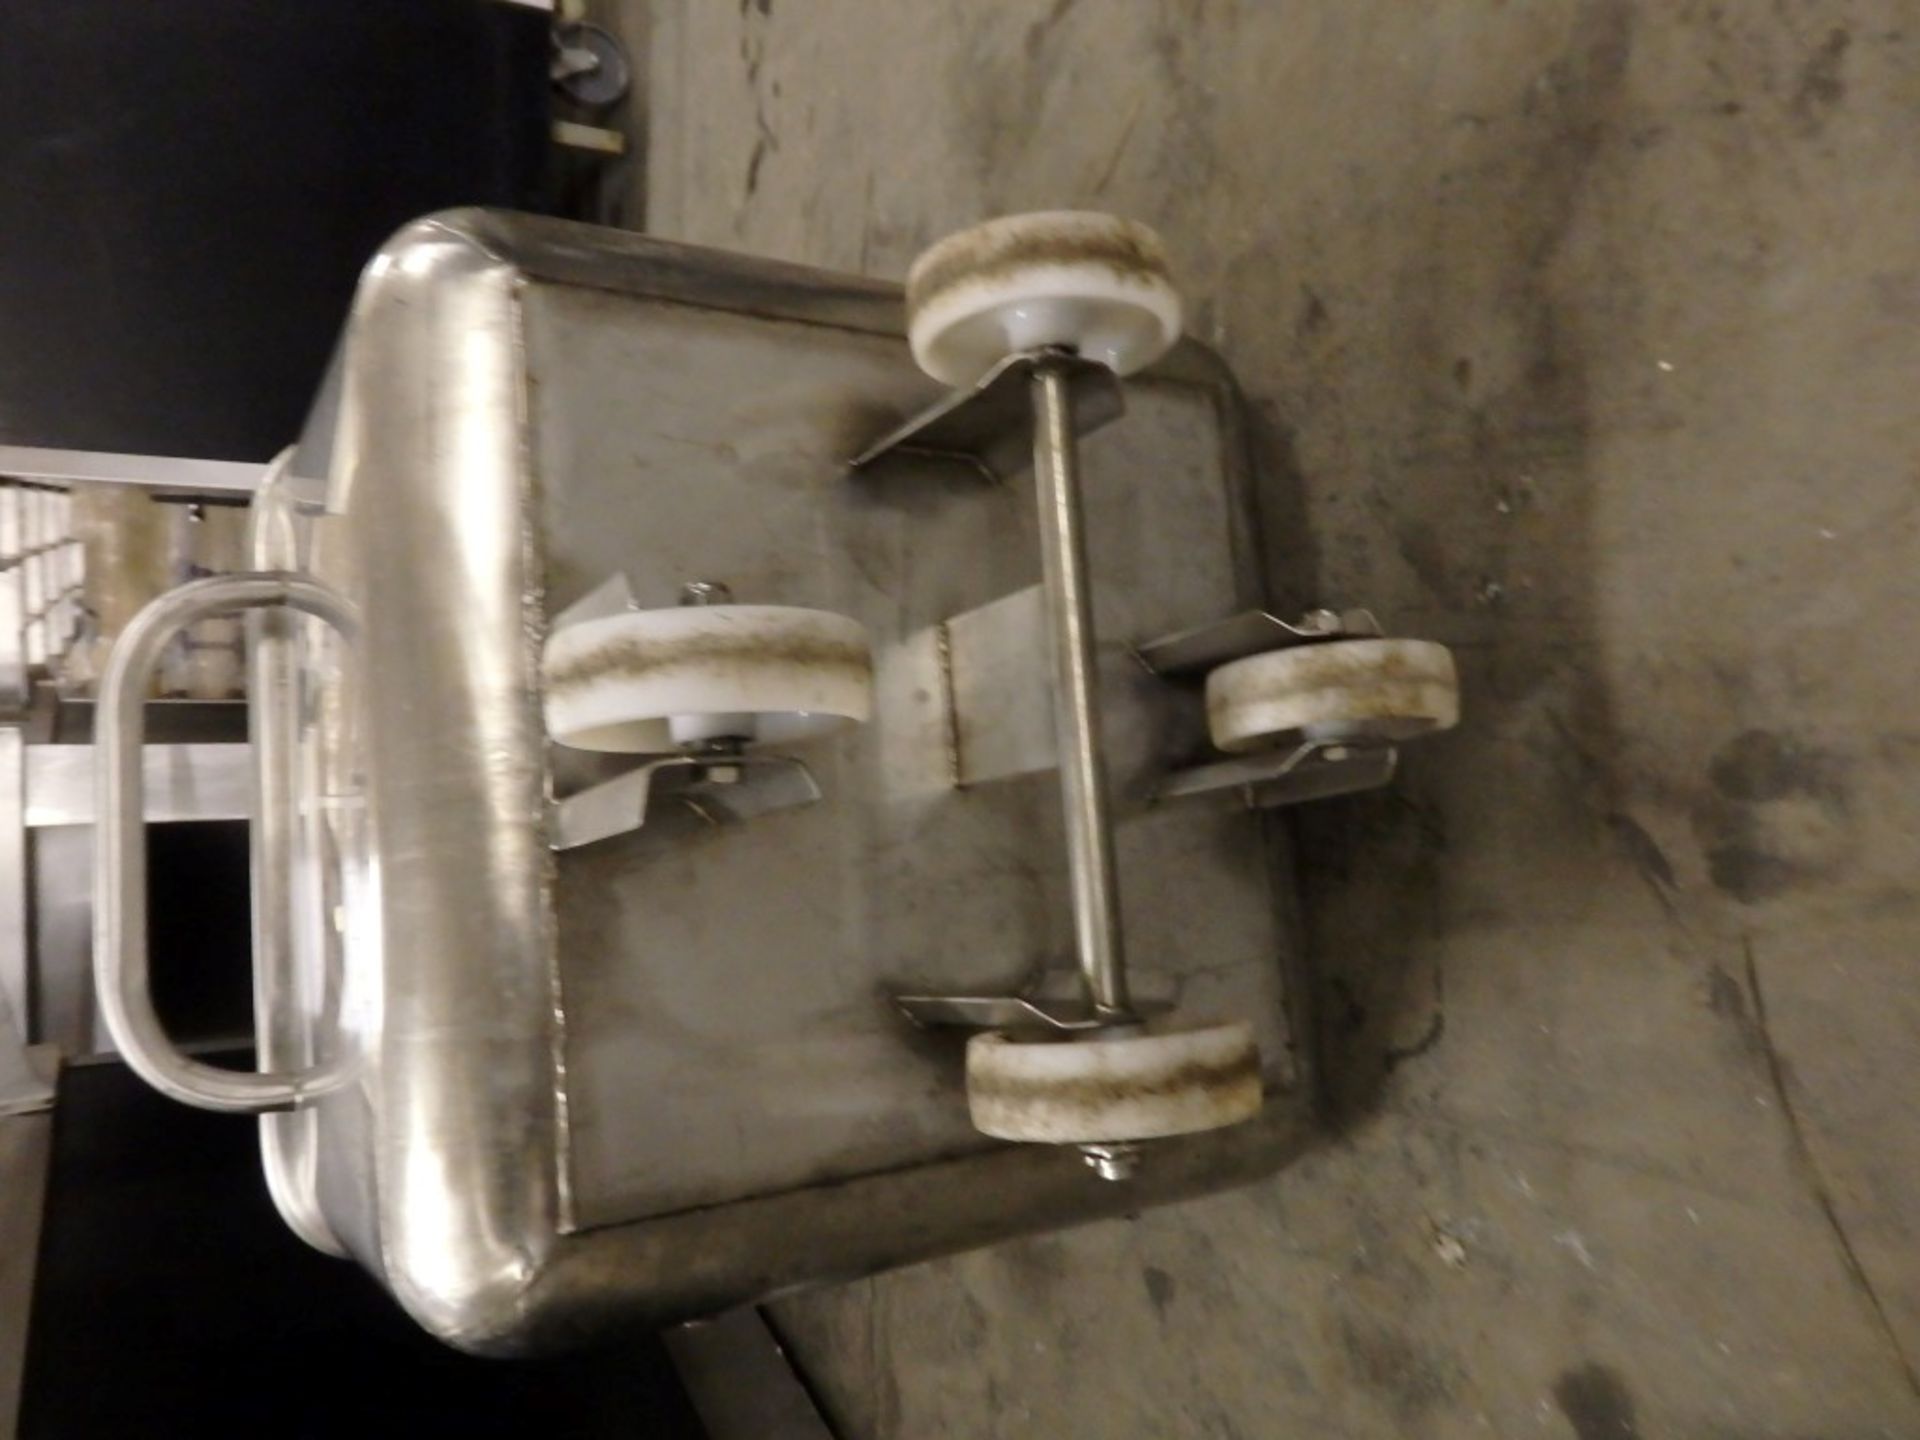 1 x Stainless Steel Catering Container On Castors With Handle - Dimensions: W58 x D58 x H58cm - Ref: - Image 3 of 5